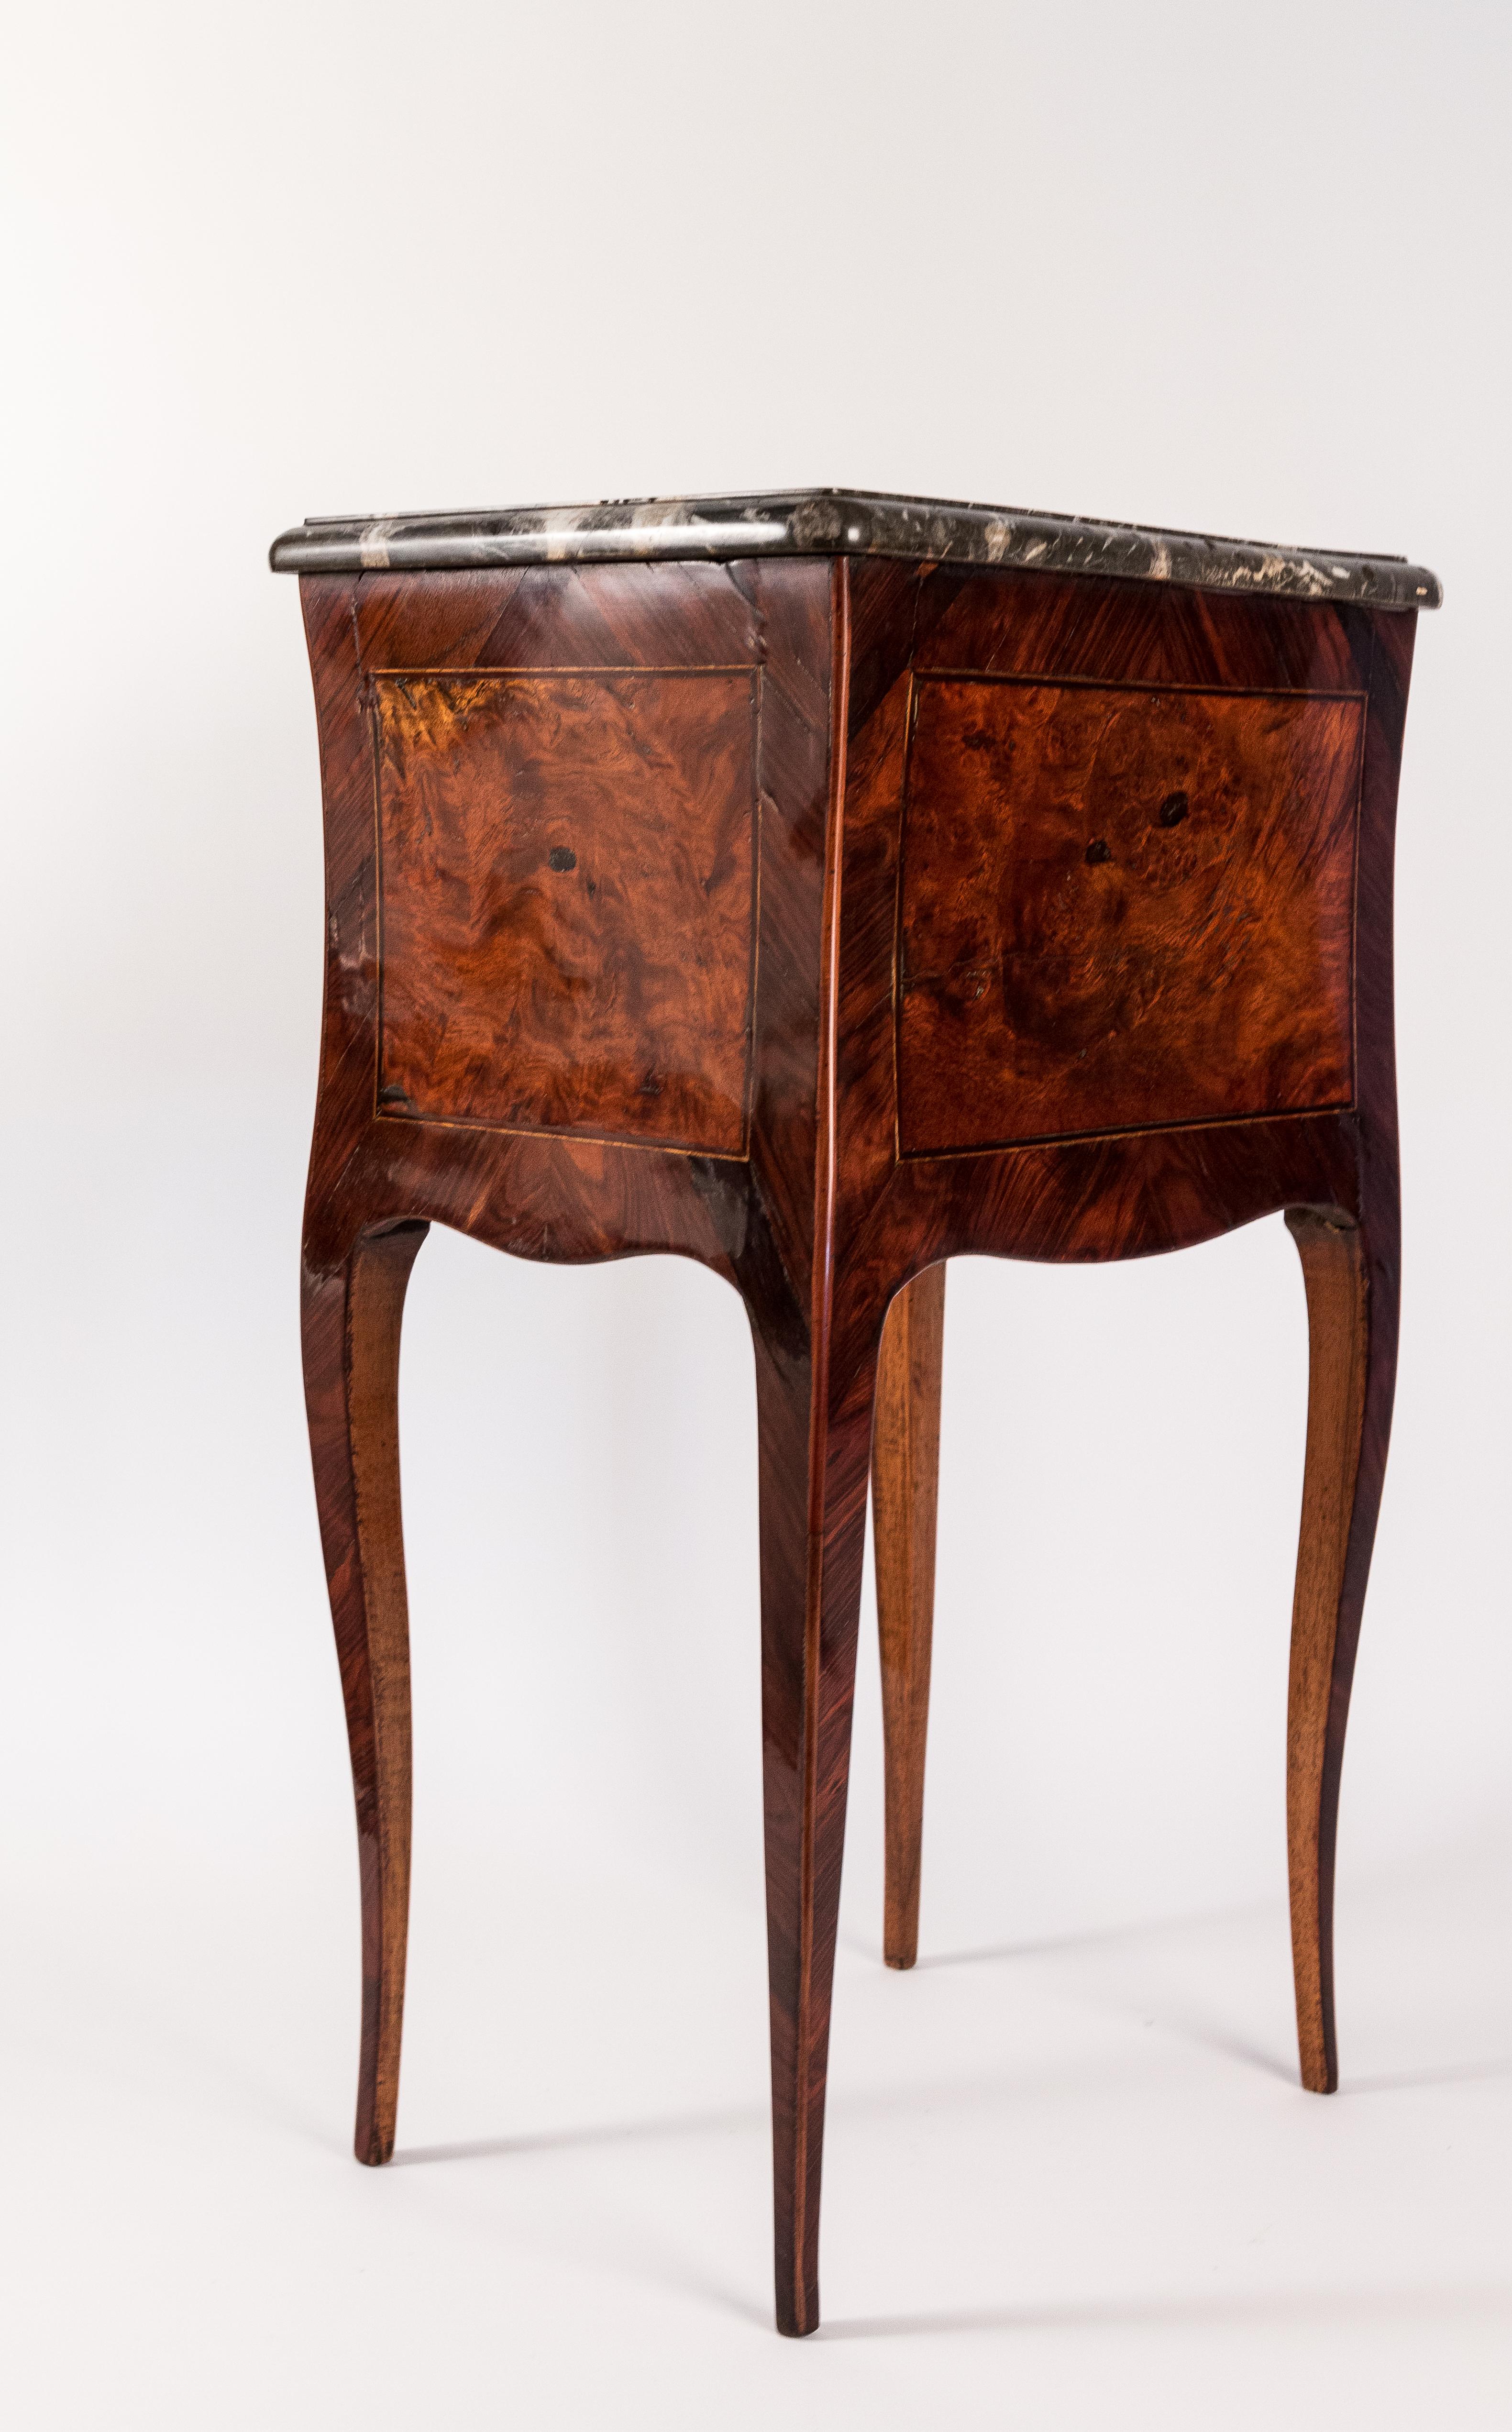 French Louis XV Style Small Serpentine Marble-Top Commode, circa 1820-1830 2